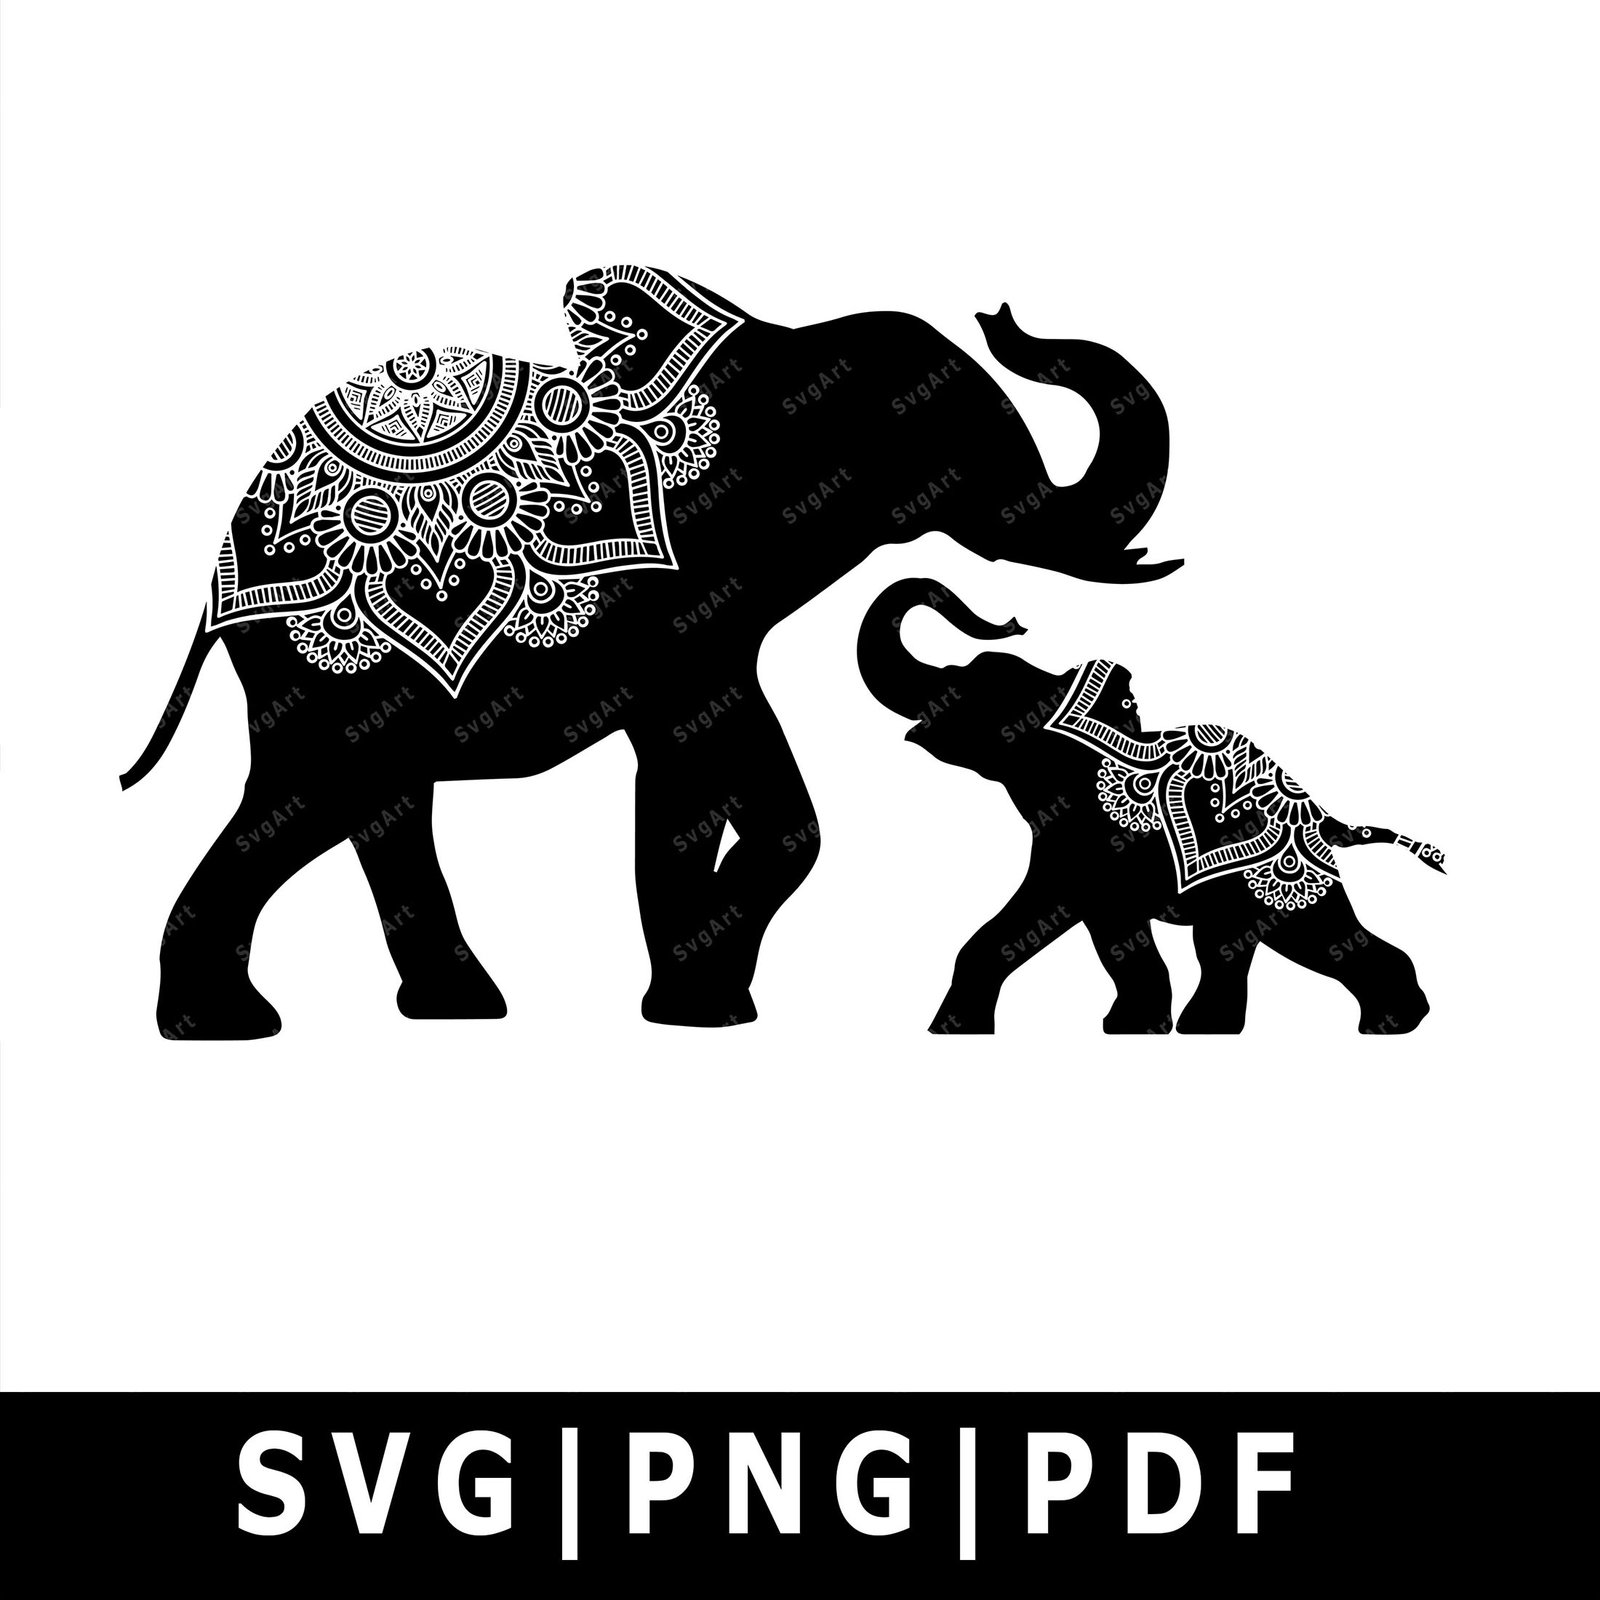 Download Elephant Mom And Baby Mandala Svg Png Pdf Cricut Silhouette Cricut Svg Silhouette Svg Elephant Svg Elephant Mandala Svg Mandala Svg Ditalgo Digital Goods Store